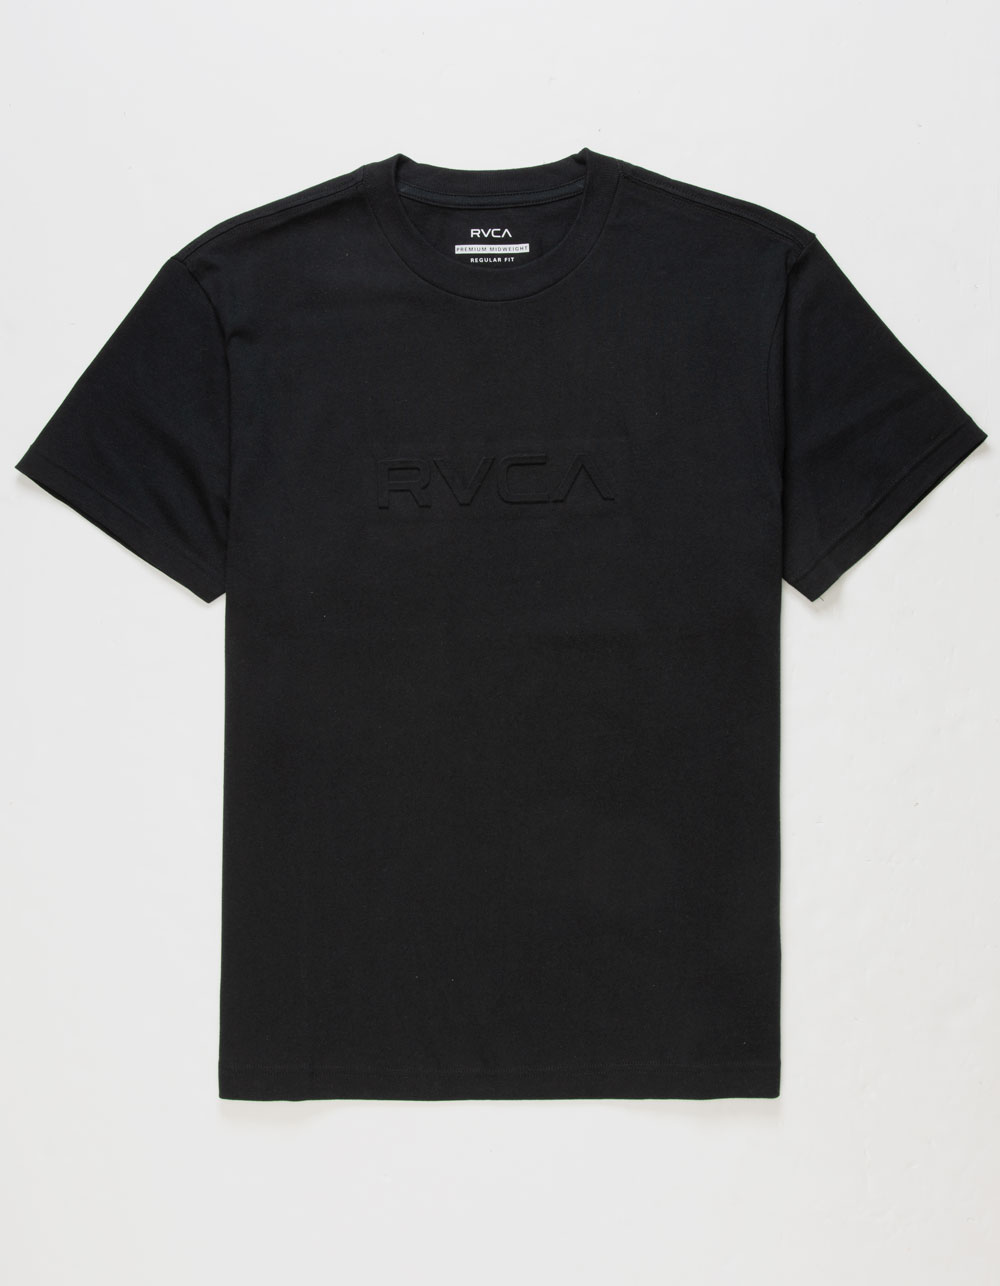 RVCA: Shirts, Clothing, & More | Tillys